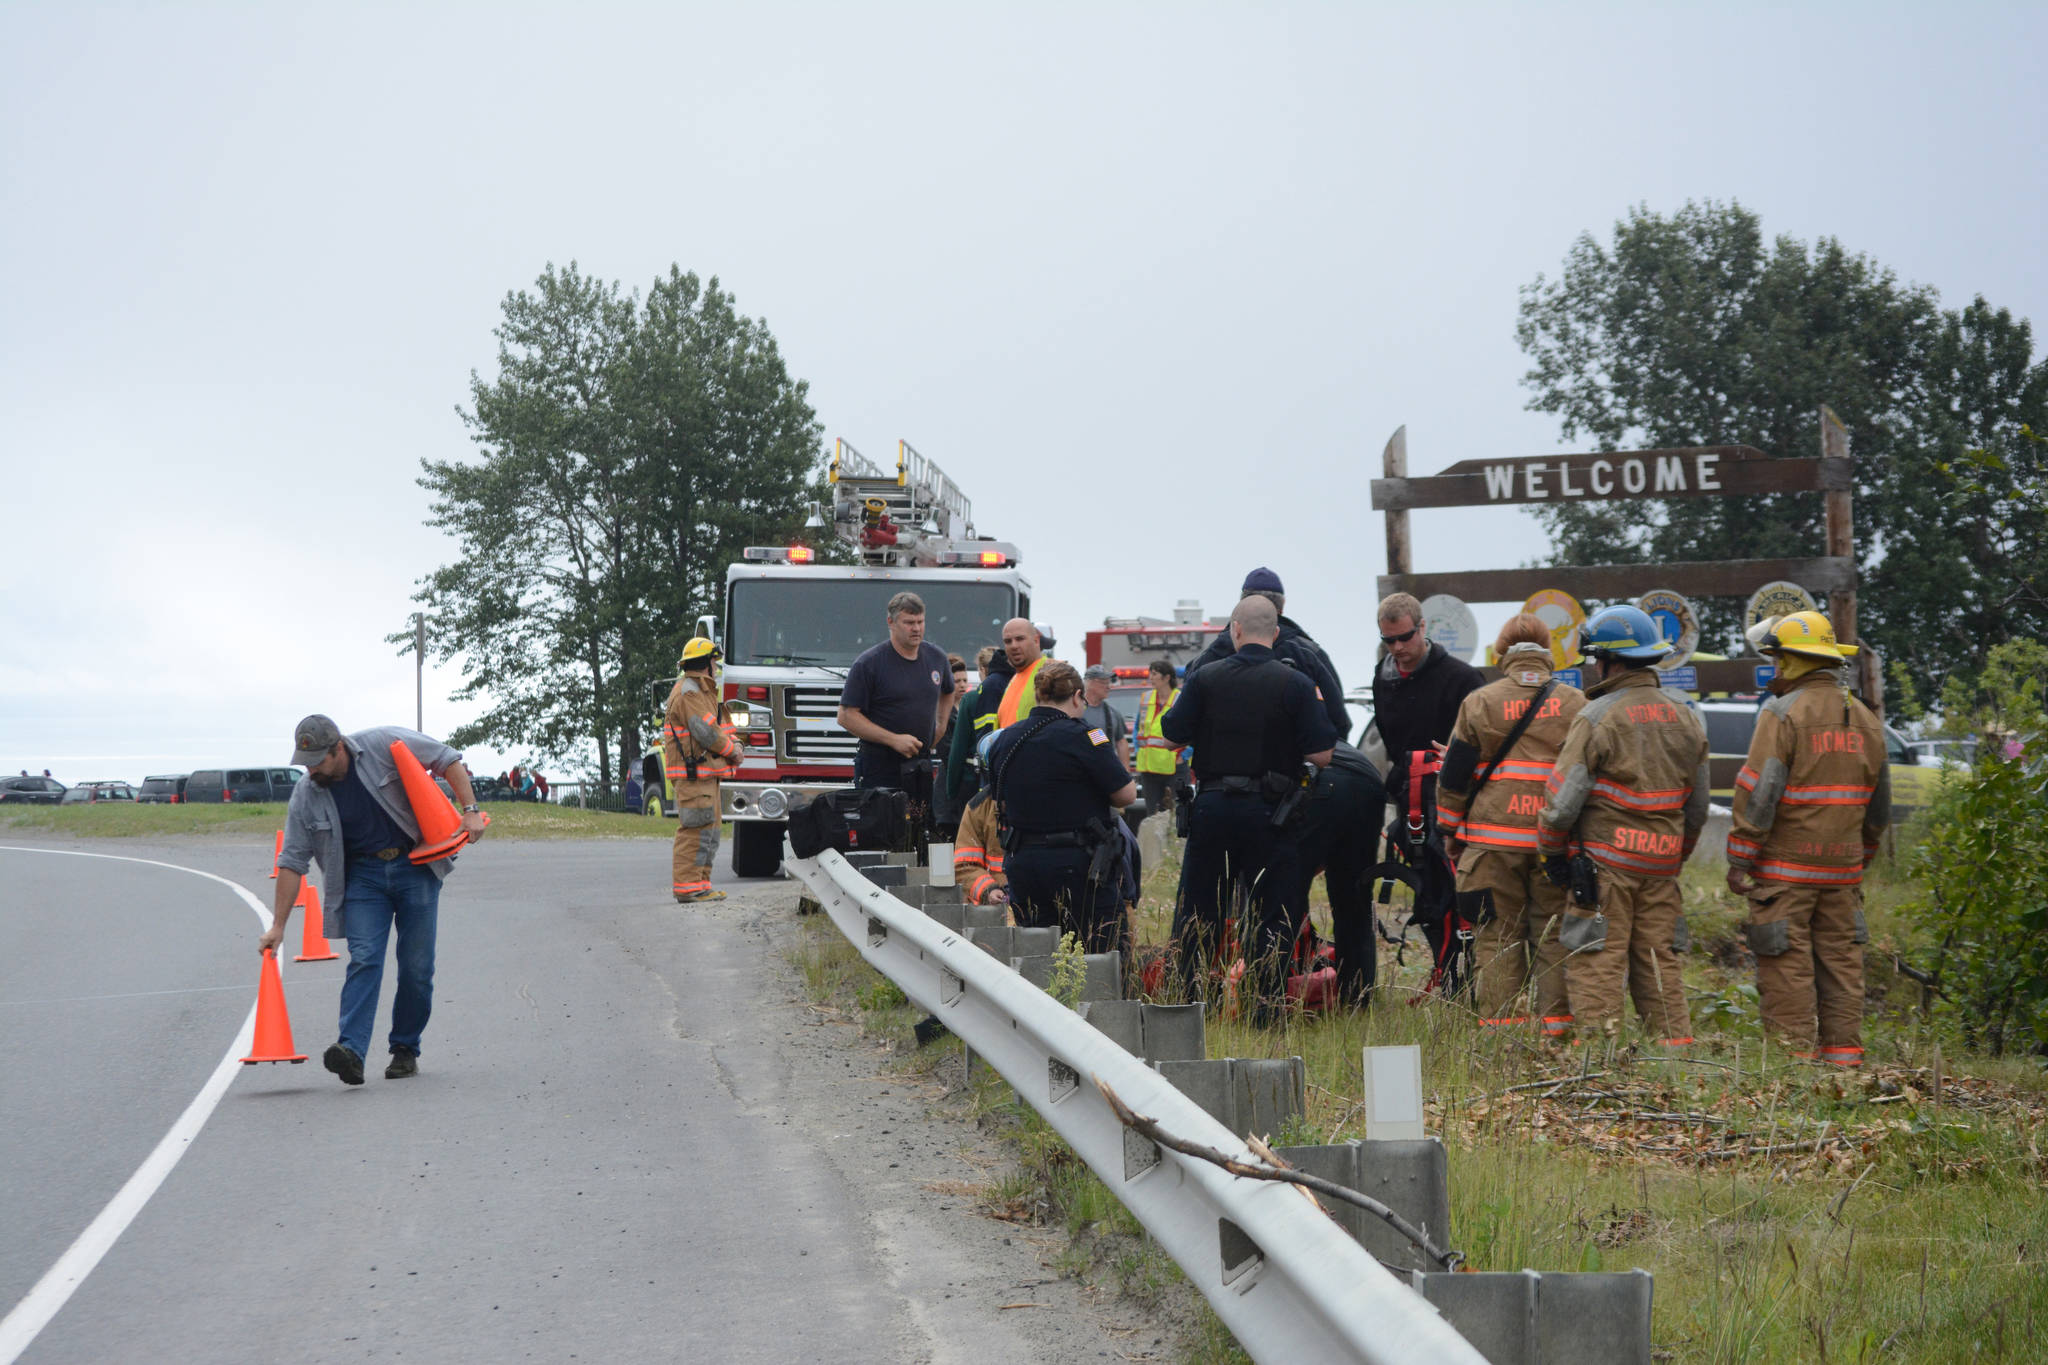 Kachemak Emergency Services volunteer firefighter Jason Miller, left, about noon on Monday, July 24, 2017 sets out traffic cones at the Baycrest Hill turnout as rescuers prepare to rope up to climb down and inspect a truck crash in Homer, Alaska. Photo by Michael Armstrong/Homer News